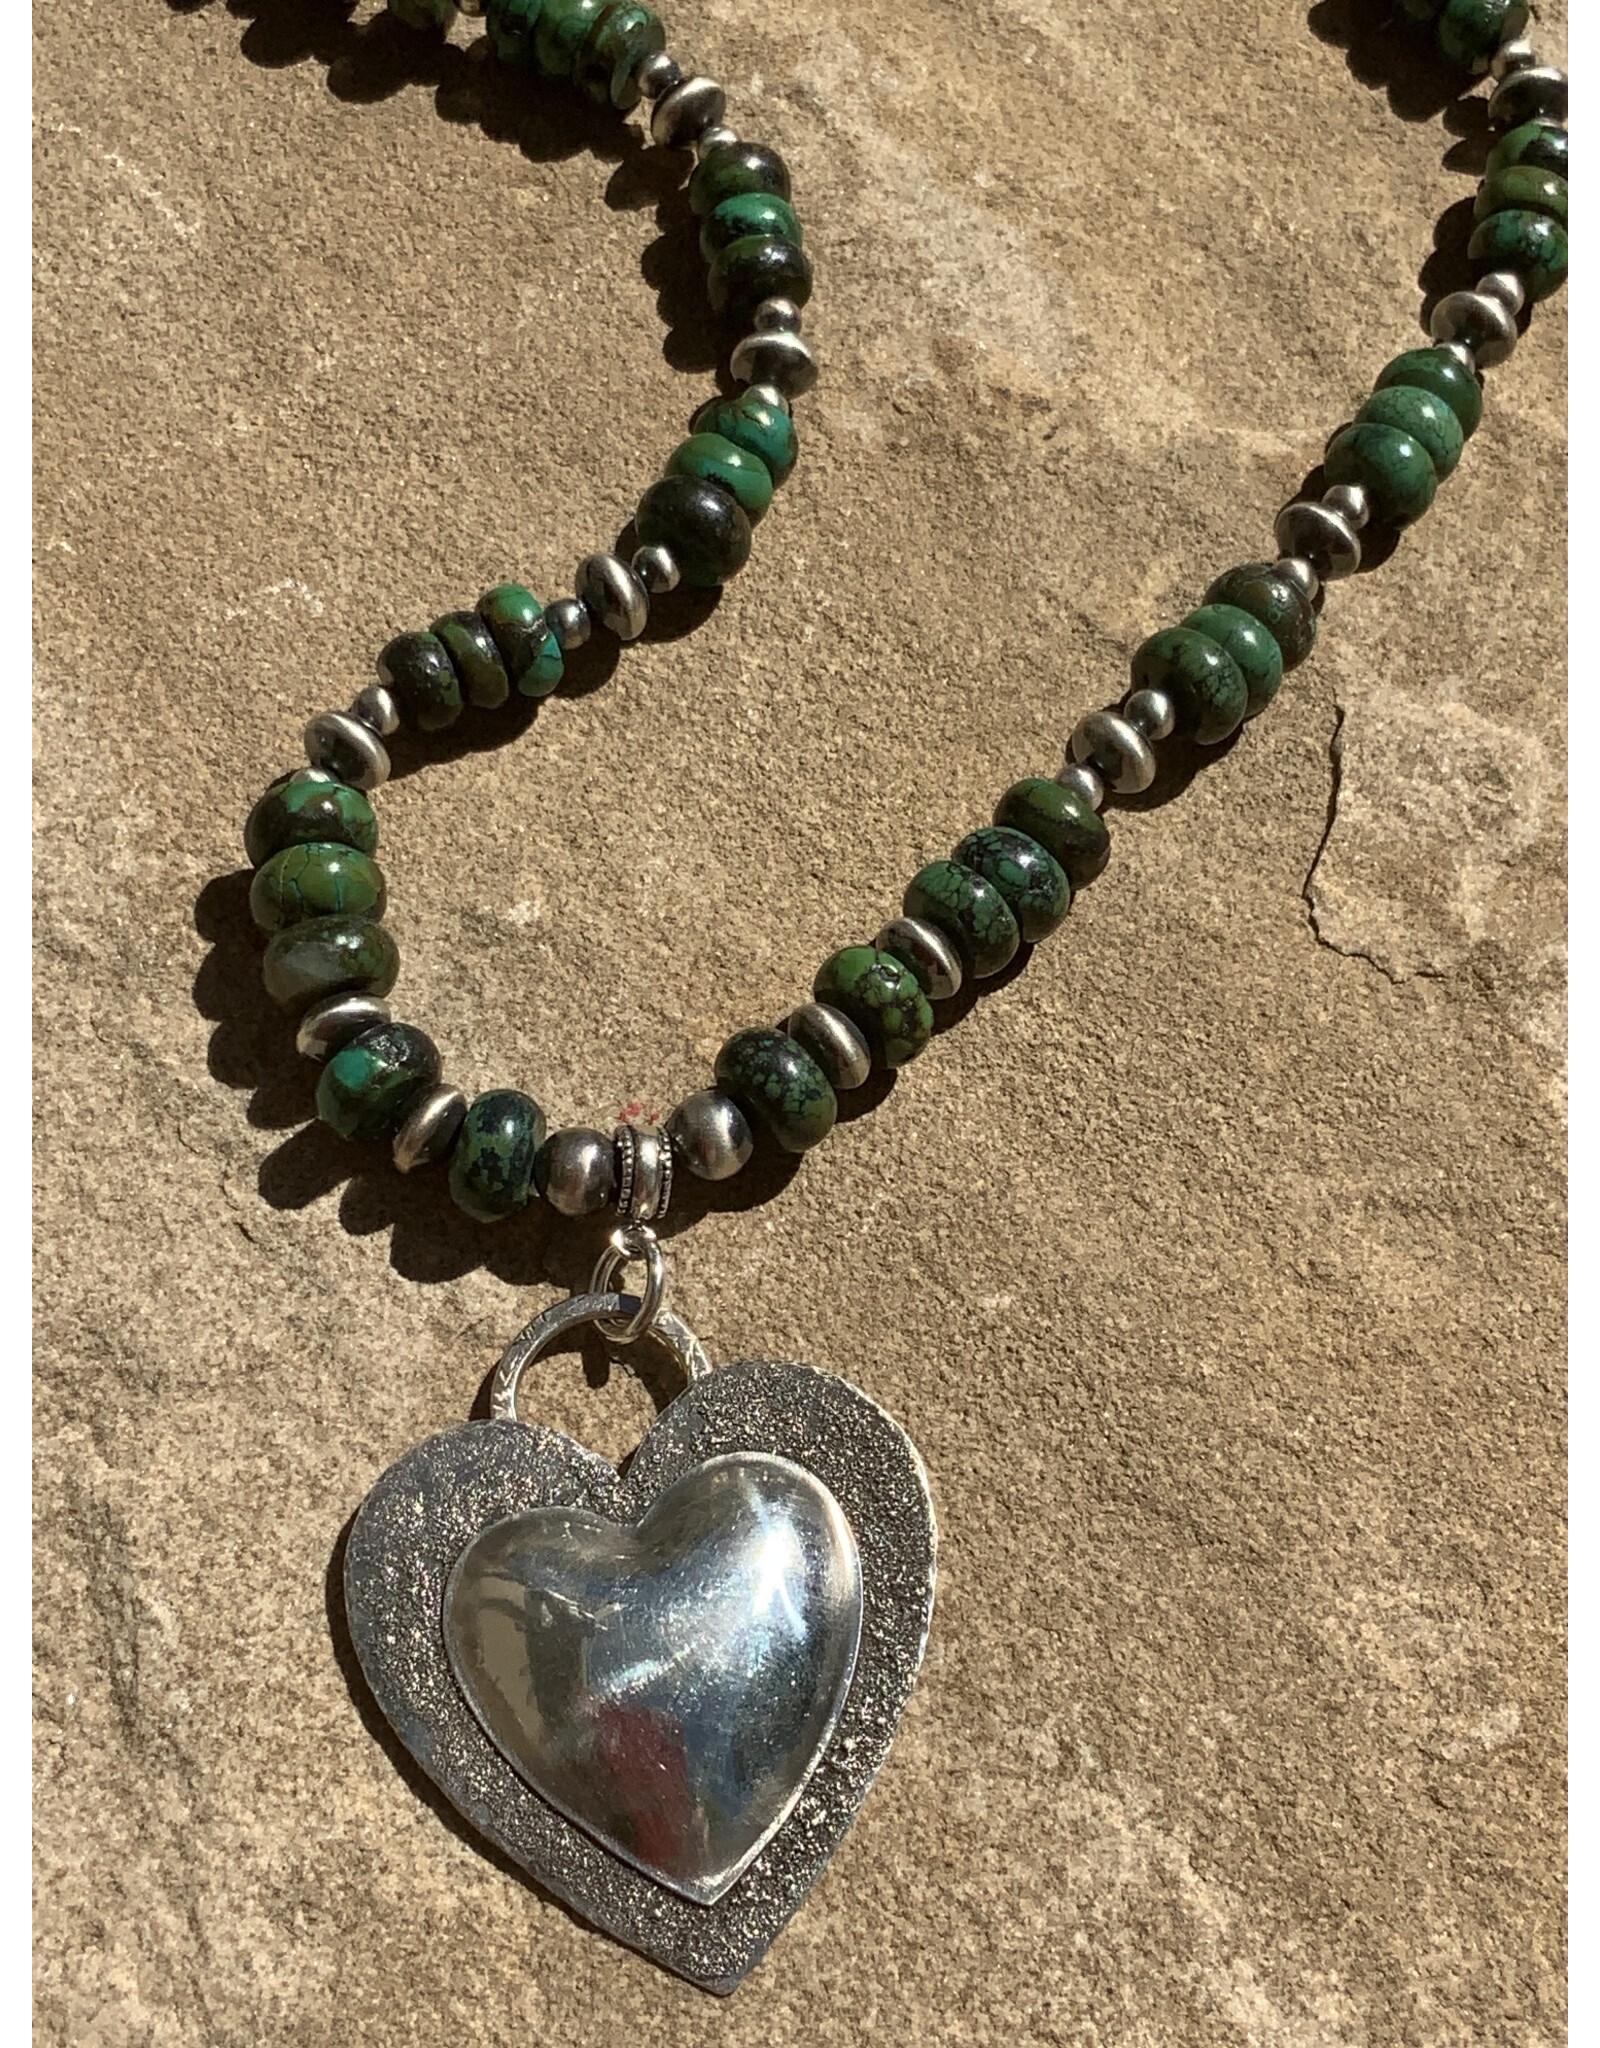 Annette Colby - Jeweler Necklace Sterling Silver Heart on Emerald Valley Turquoise - AC